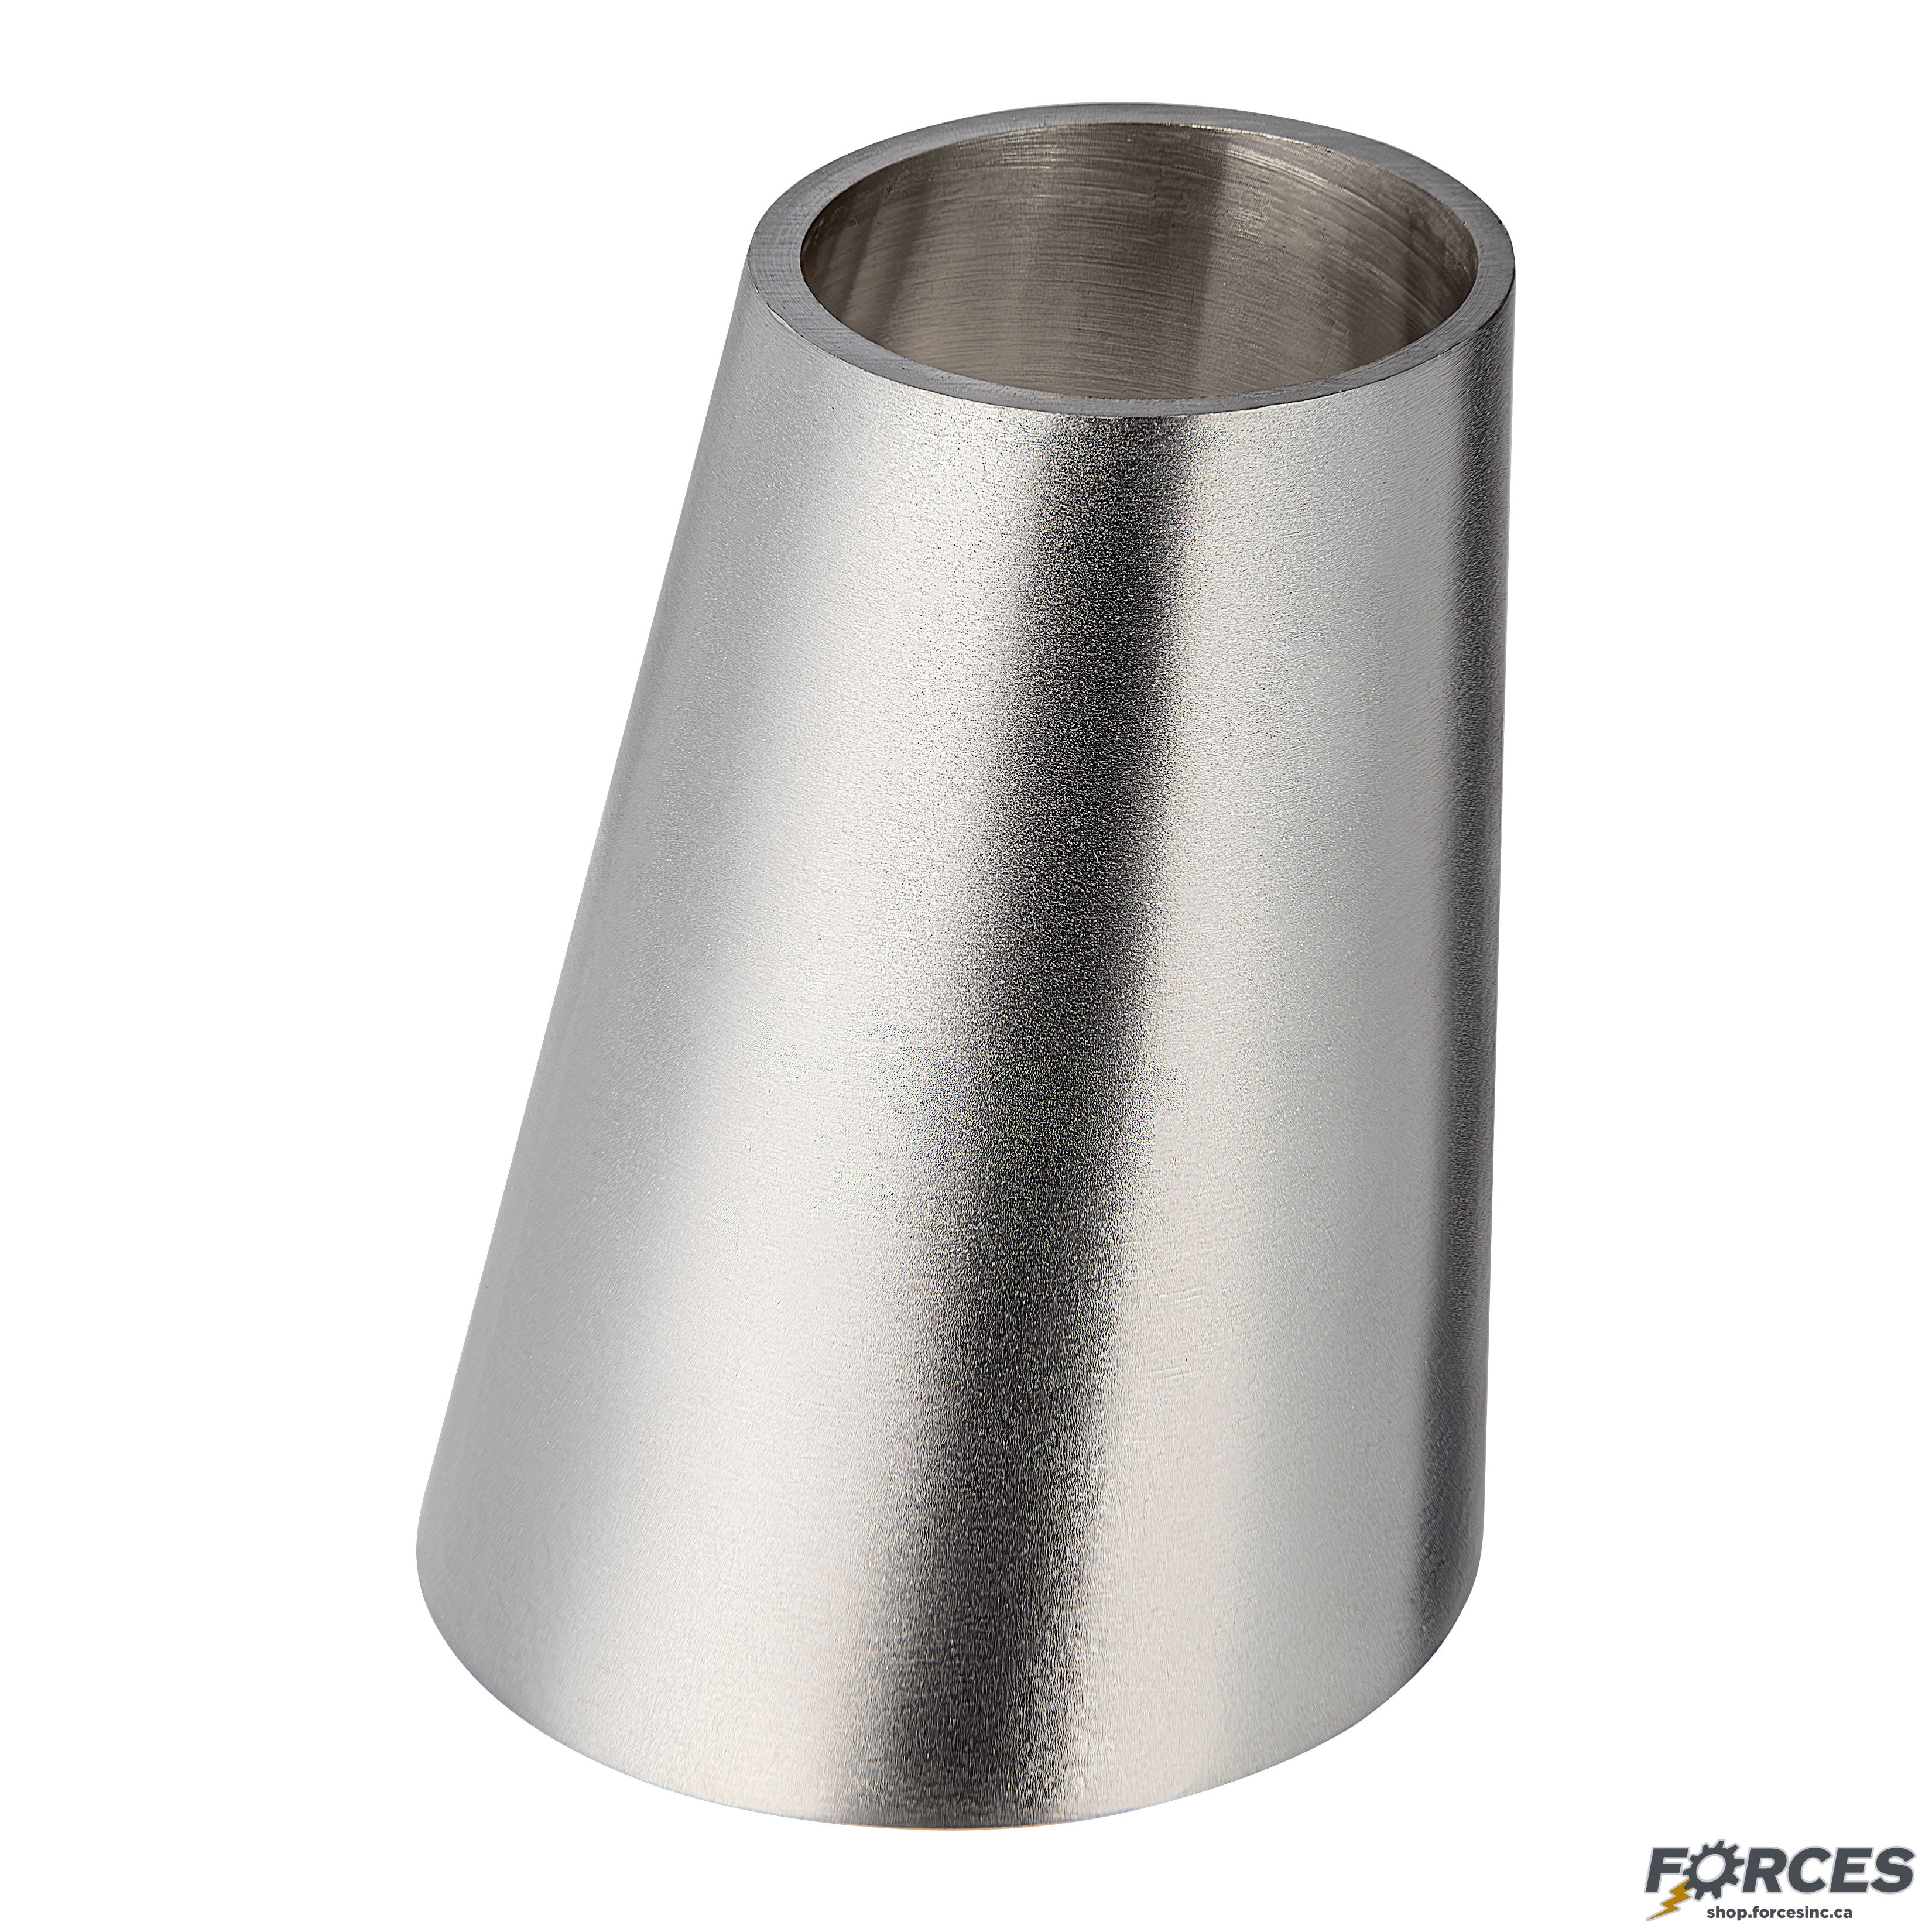 3" x 2" Butt Weld Eccentric Reducer - Stainless Steel 304 - Forces Inc